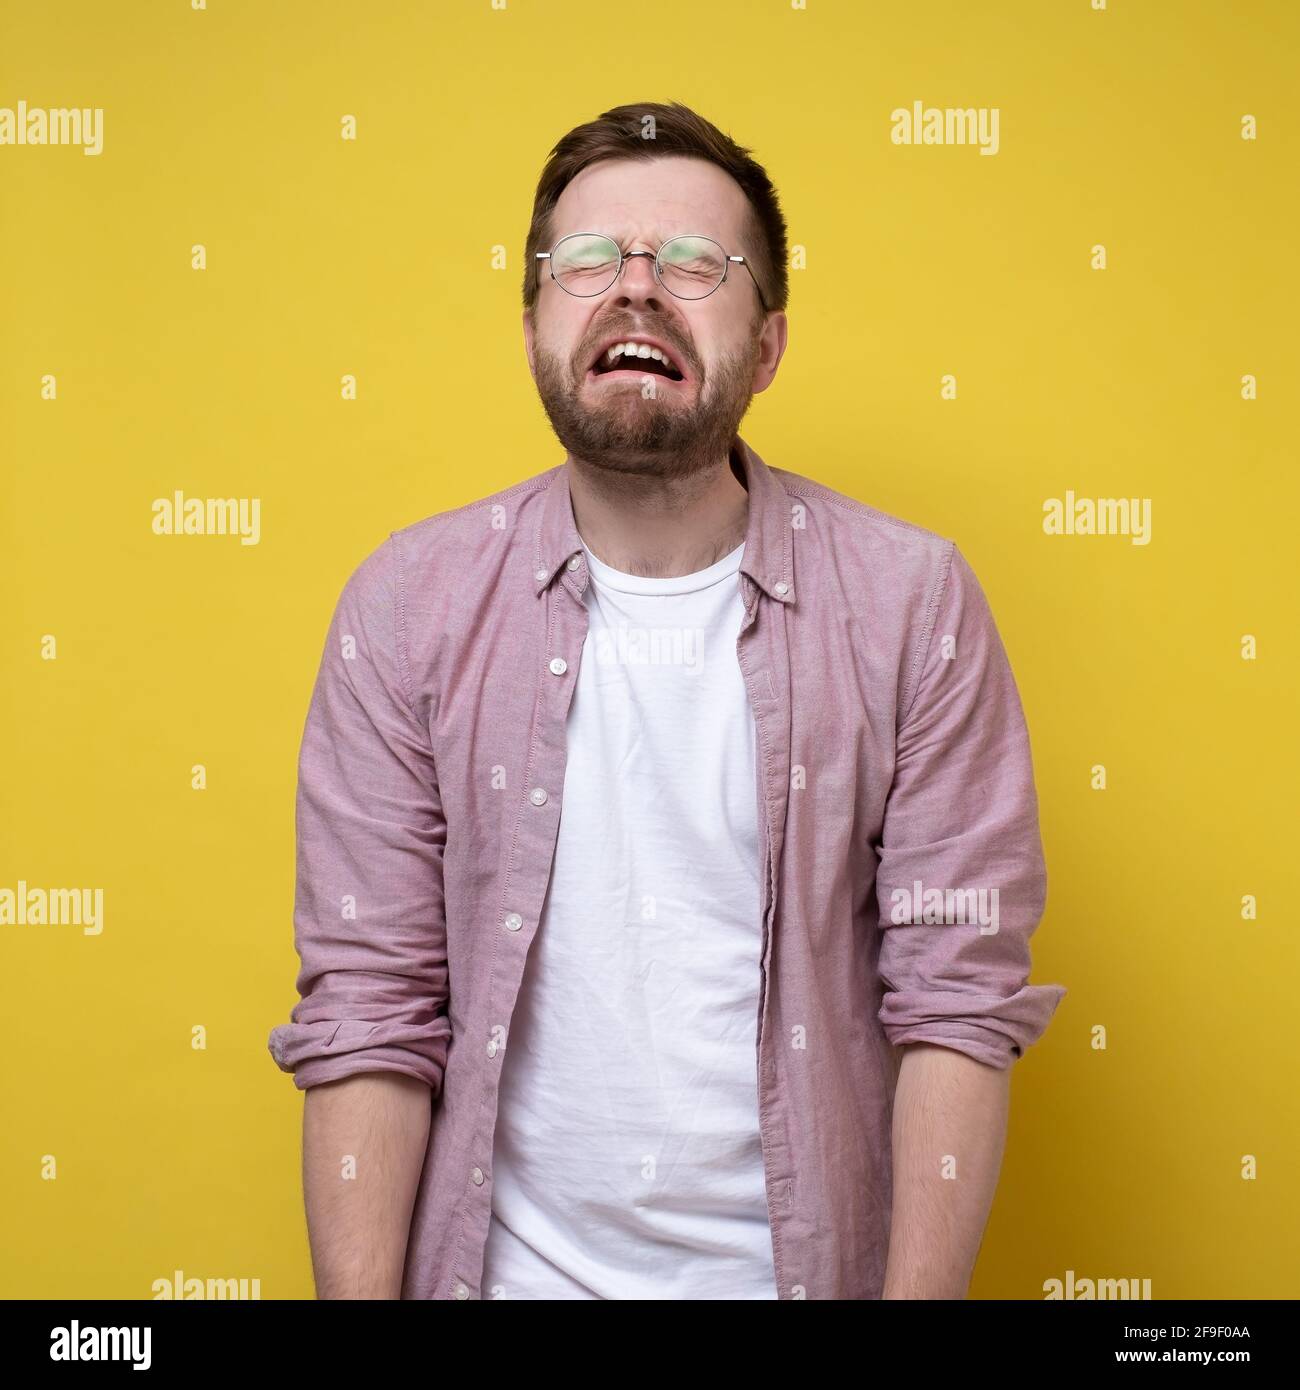 Sobbing, unhappy man in glasses and casual clothes, stands with hands down and eyes closed. Stress concept. Yellow background. Stock Photo